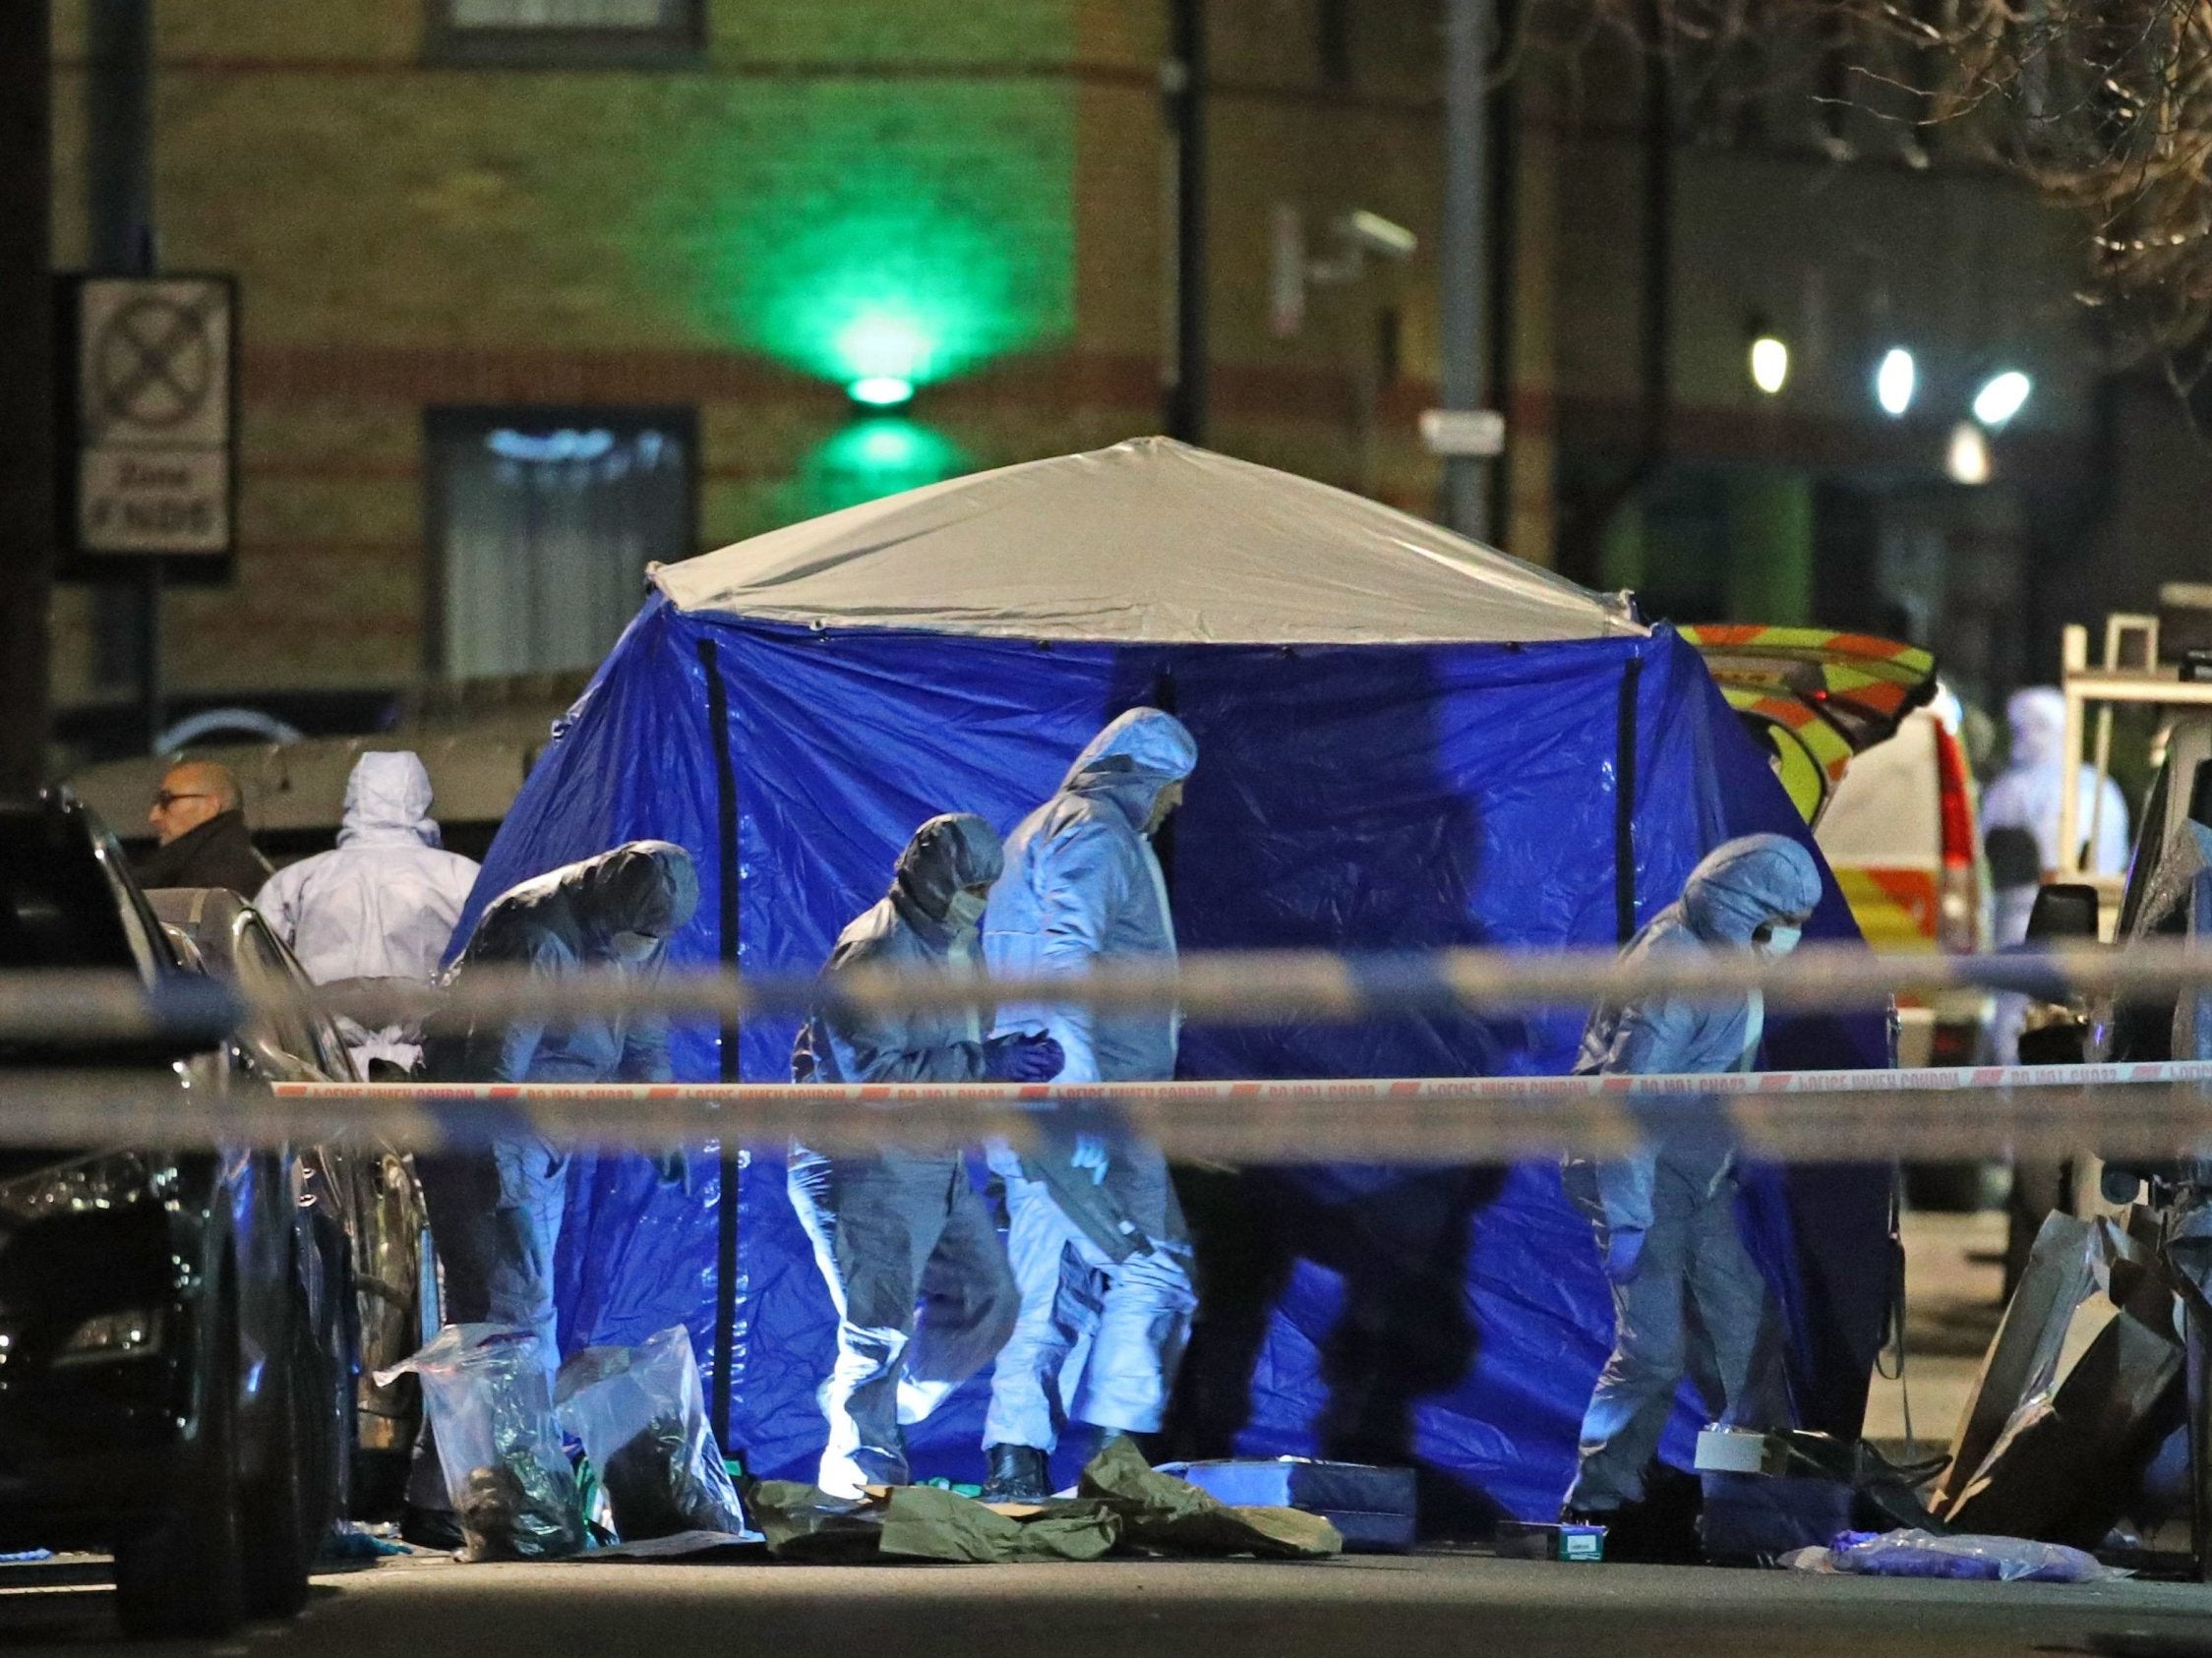 Fatal stabbings in England and Wales have reached their highest level in over 70 years